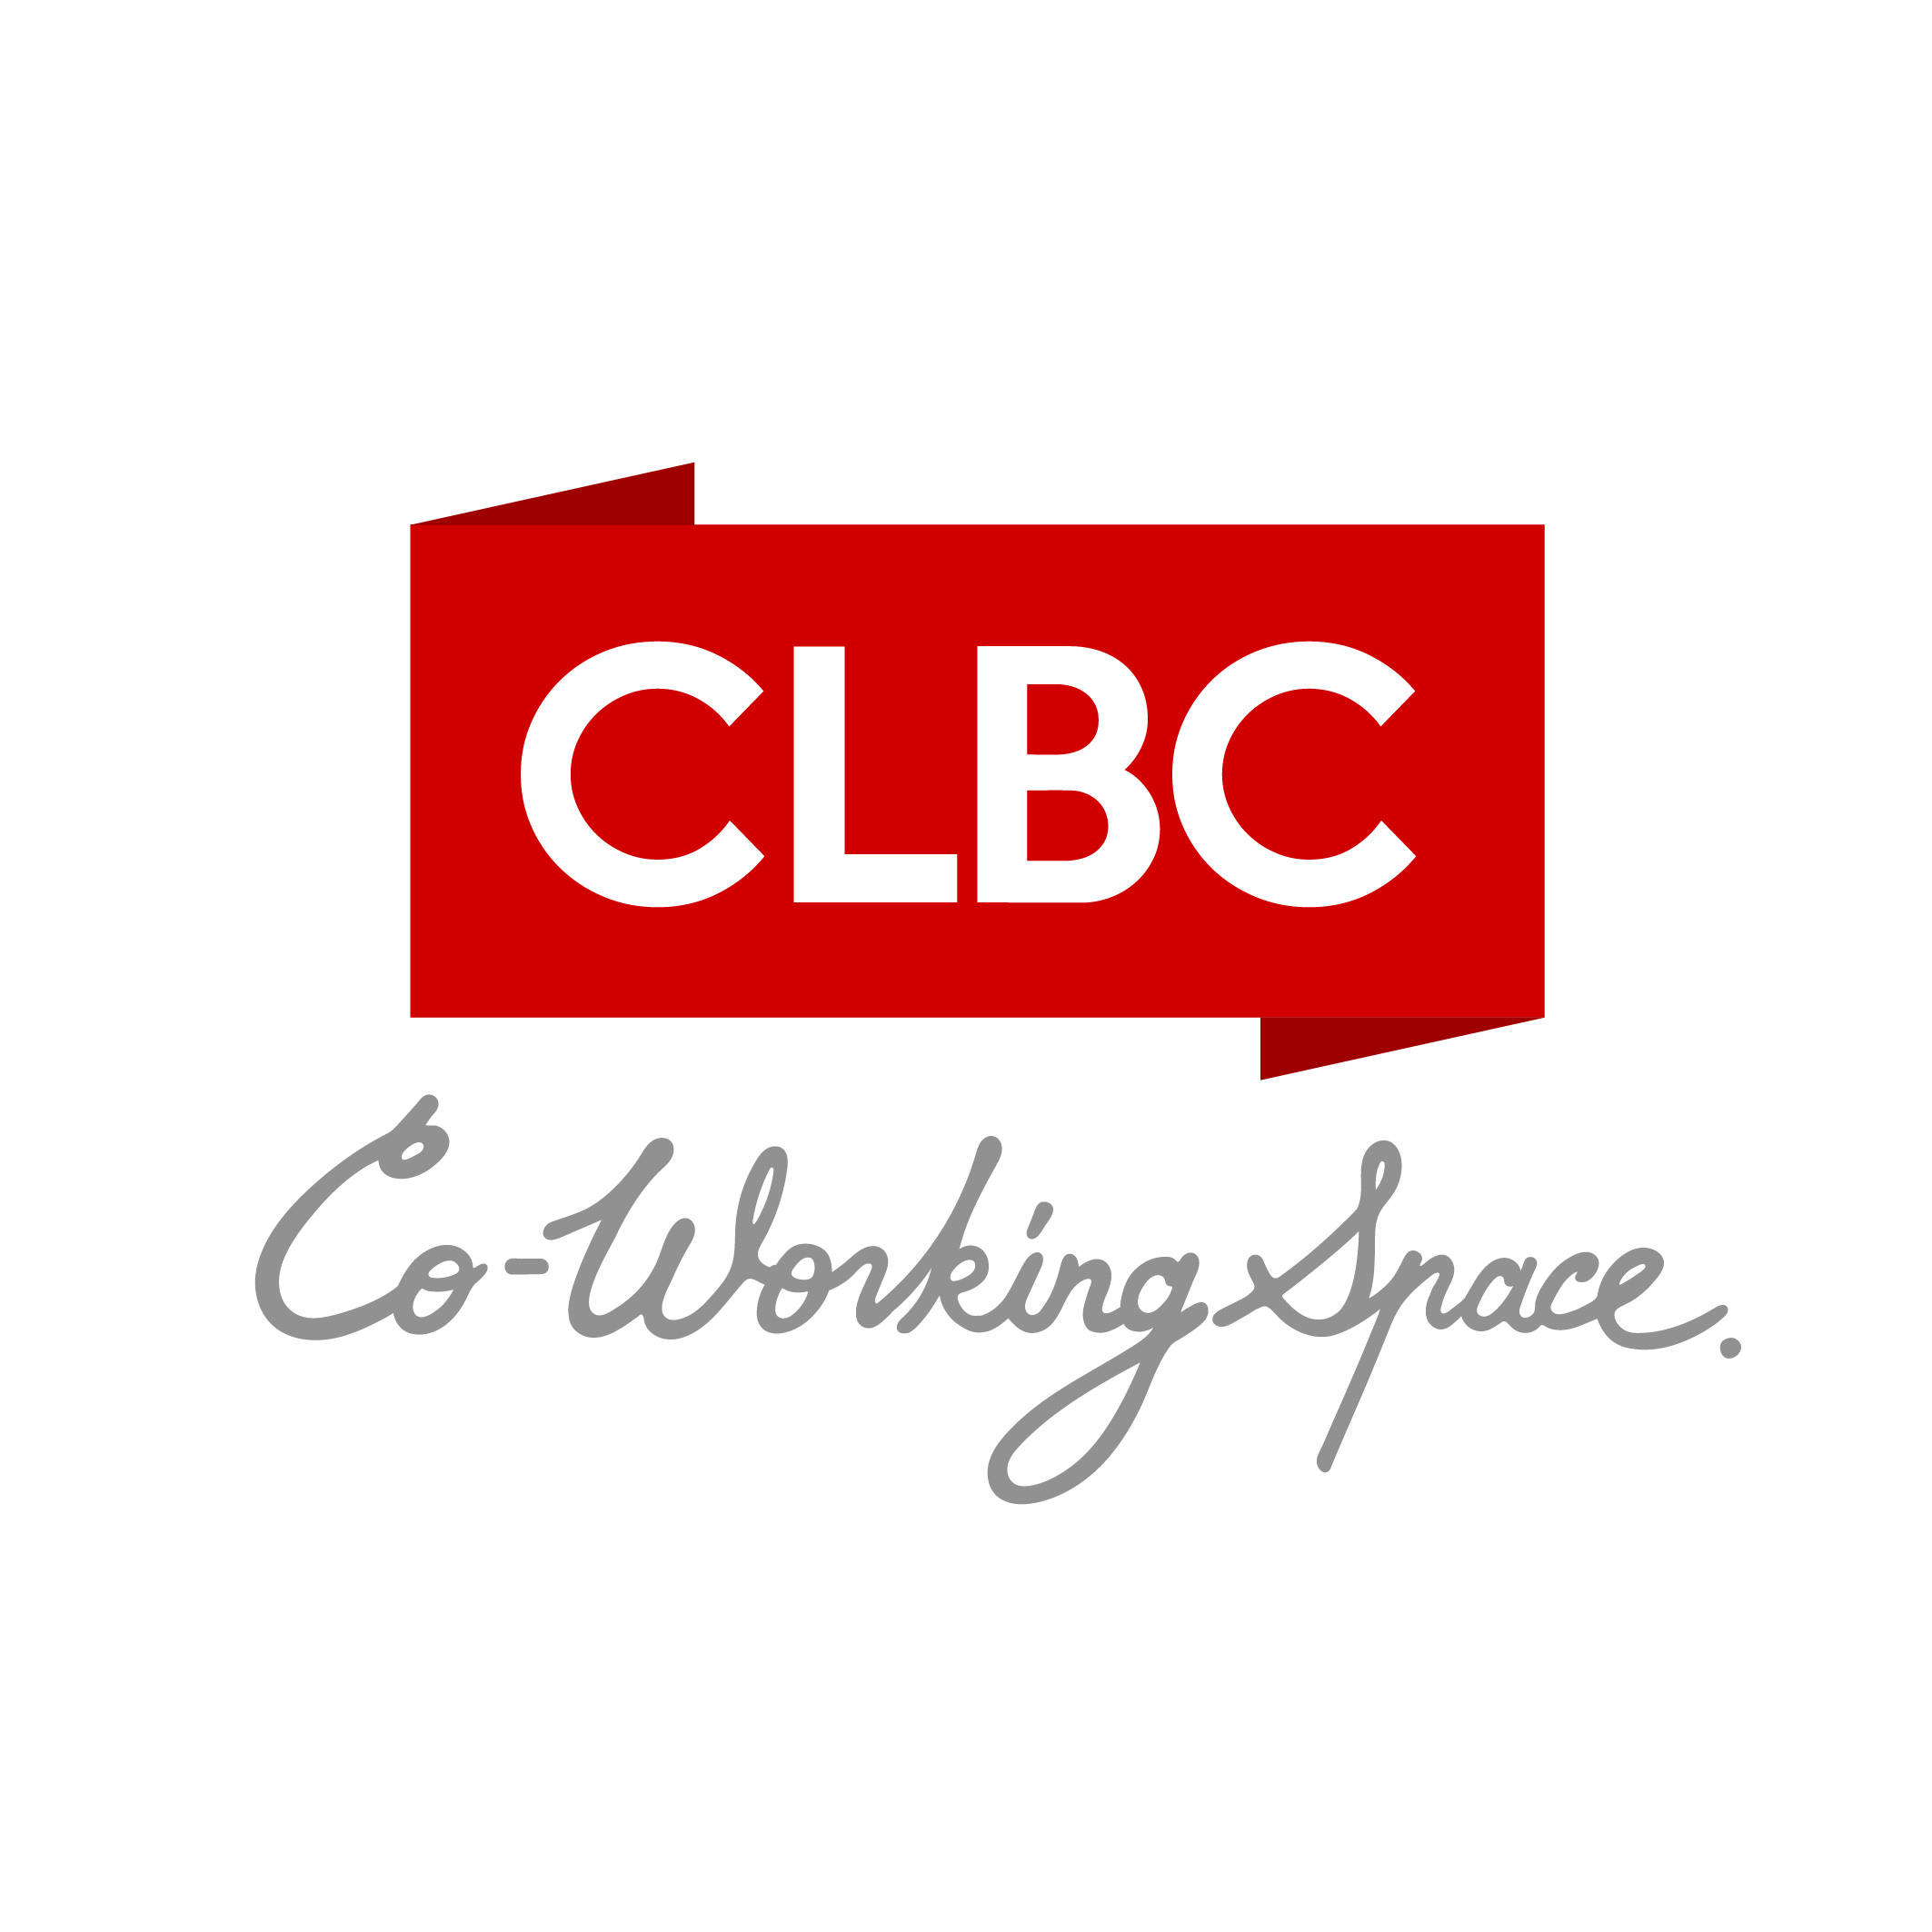 clbctw